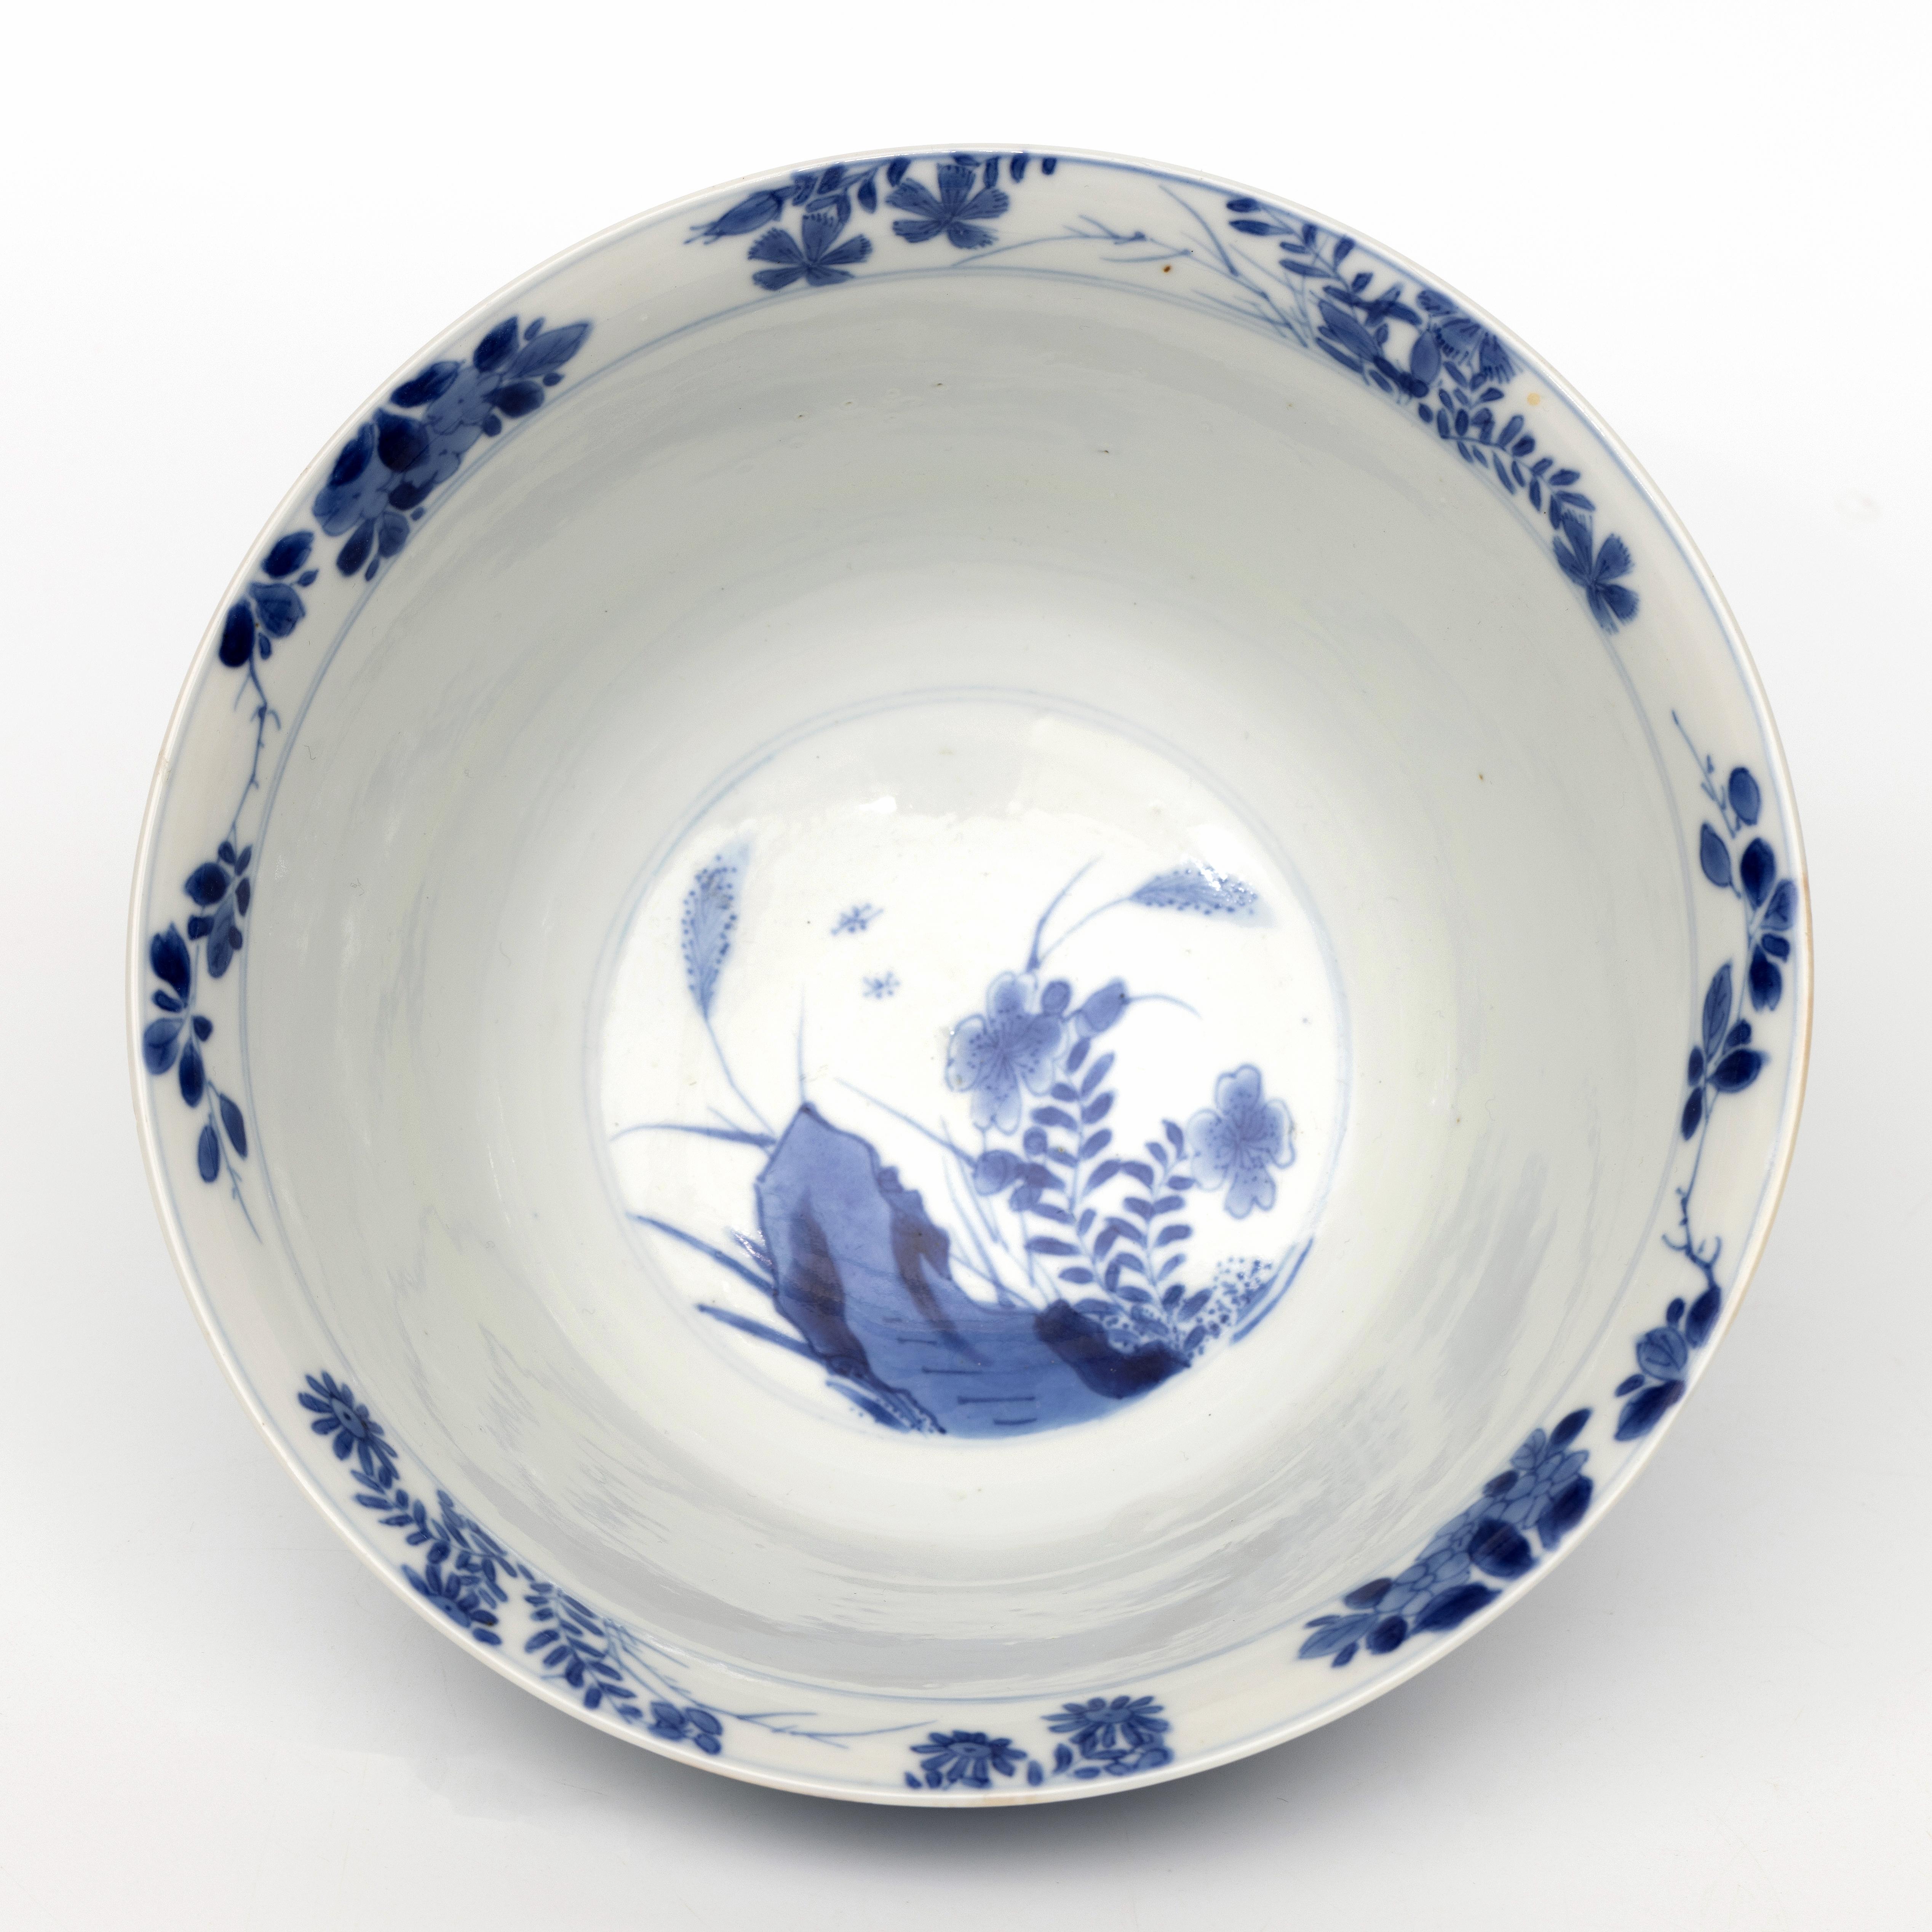 China, a blue and white porcelain bowl, Kangxi period (1662-1722), - Image 2 of 6